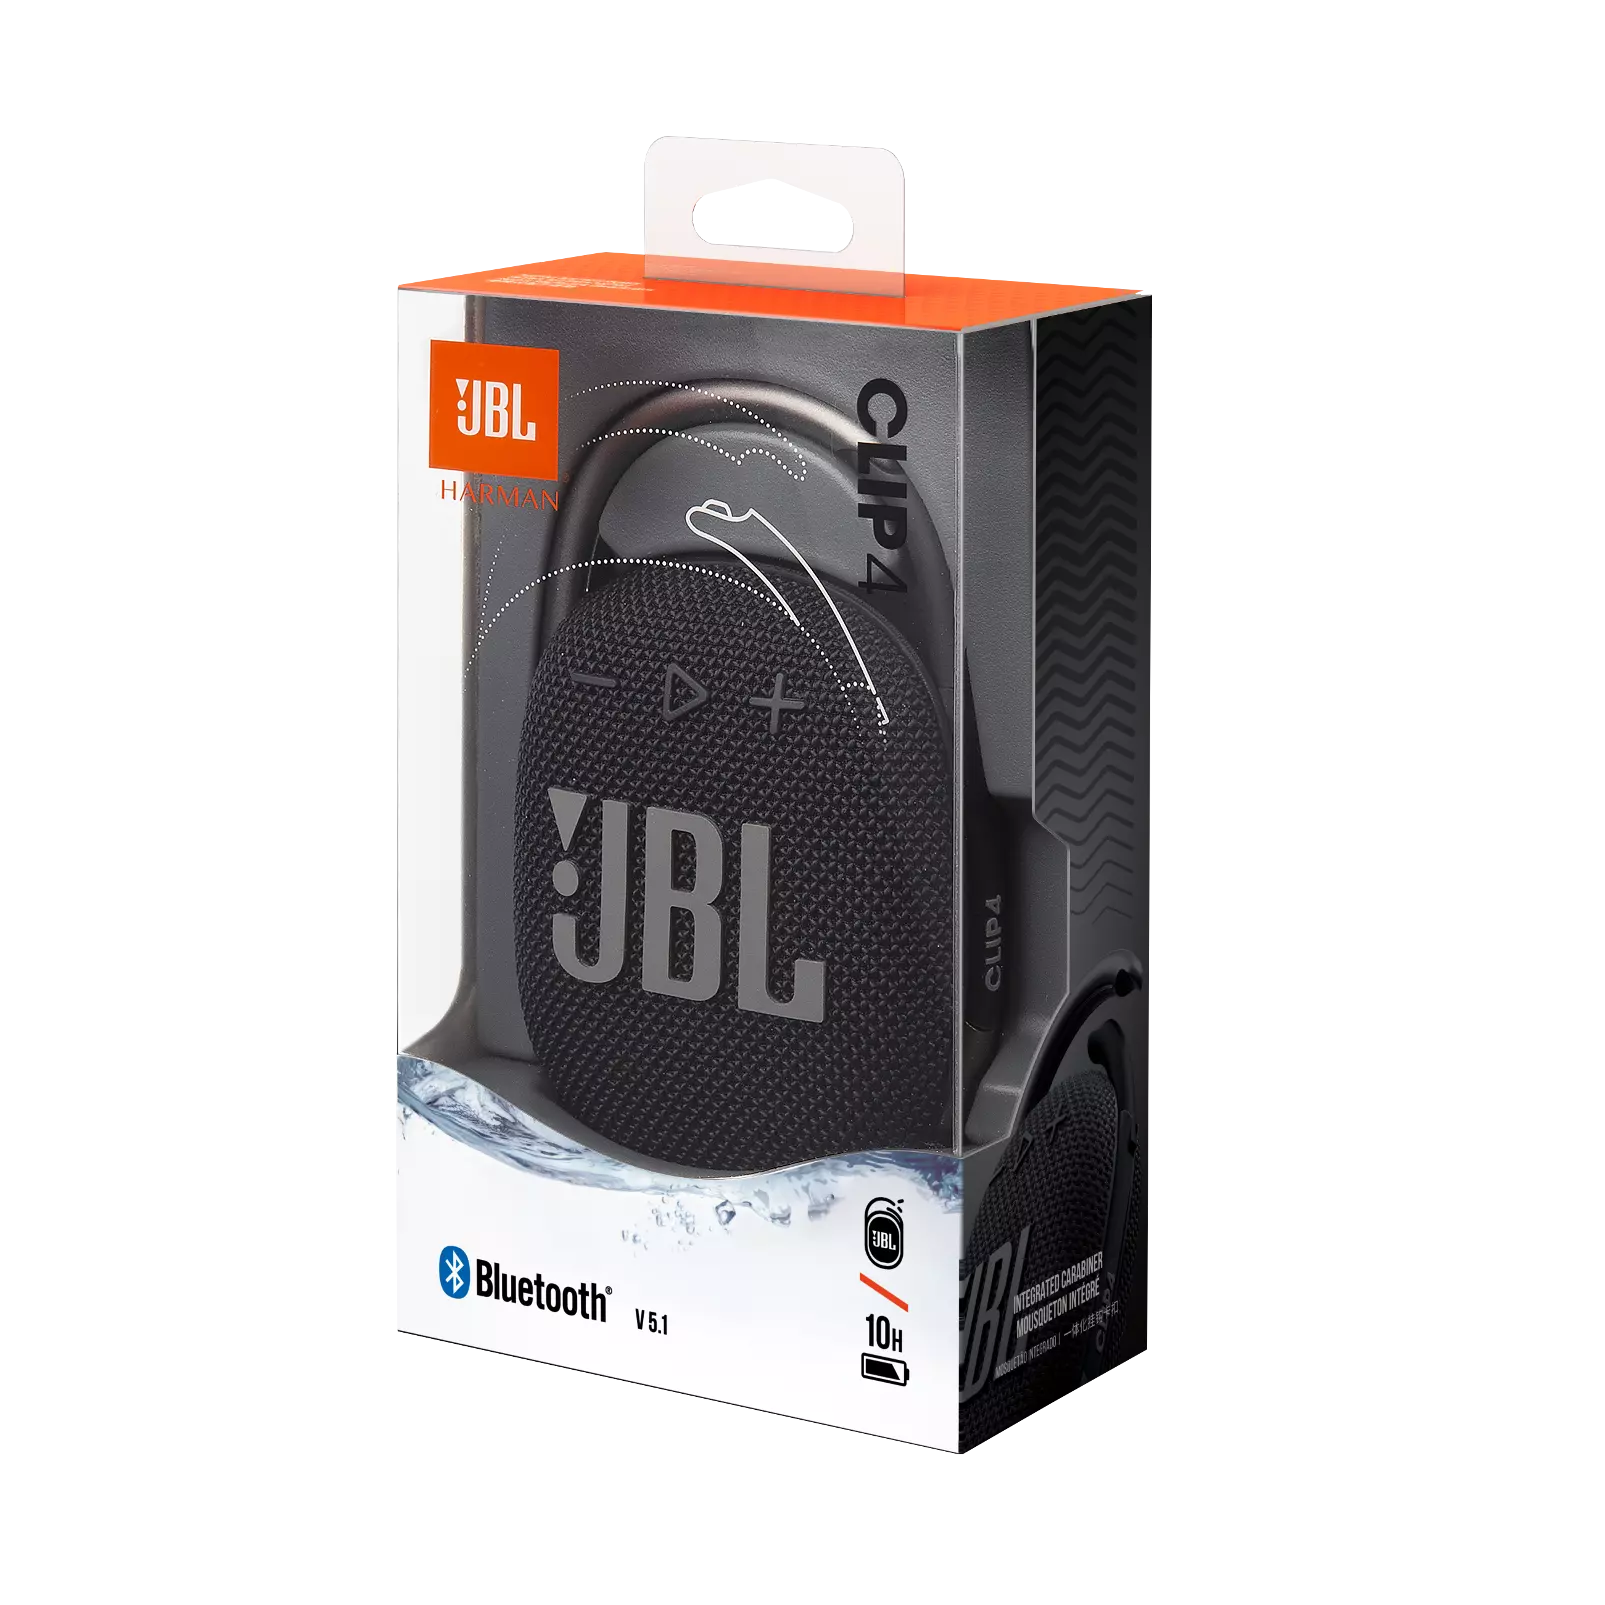 JBL Clip  Ultra portable rechargeable speaker with integrated